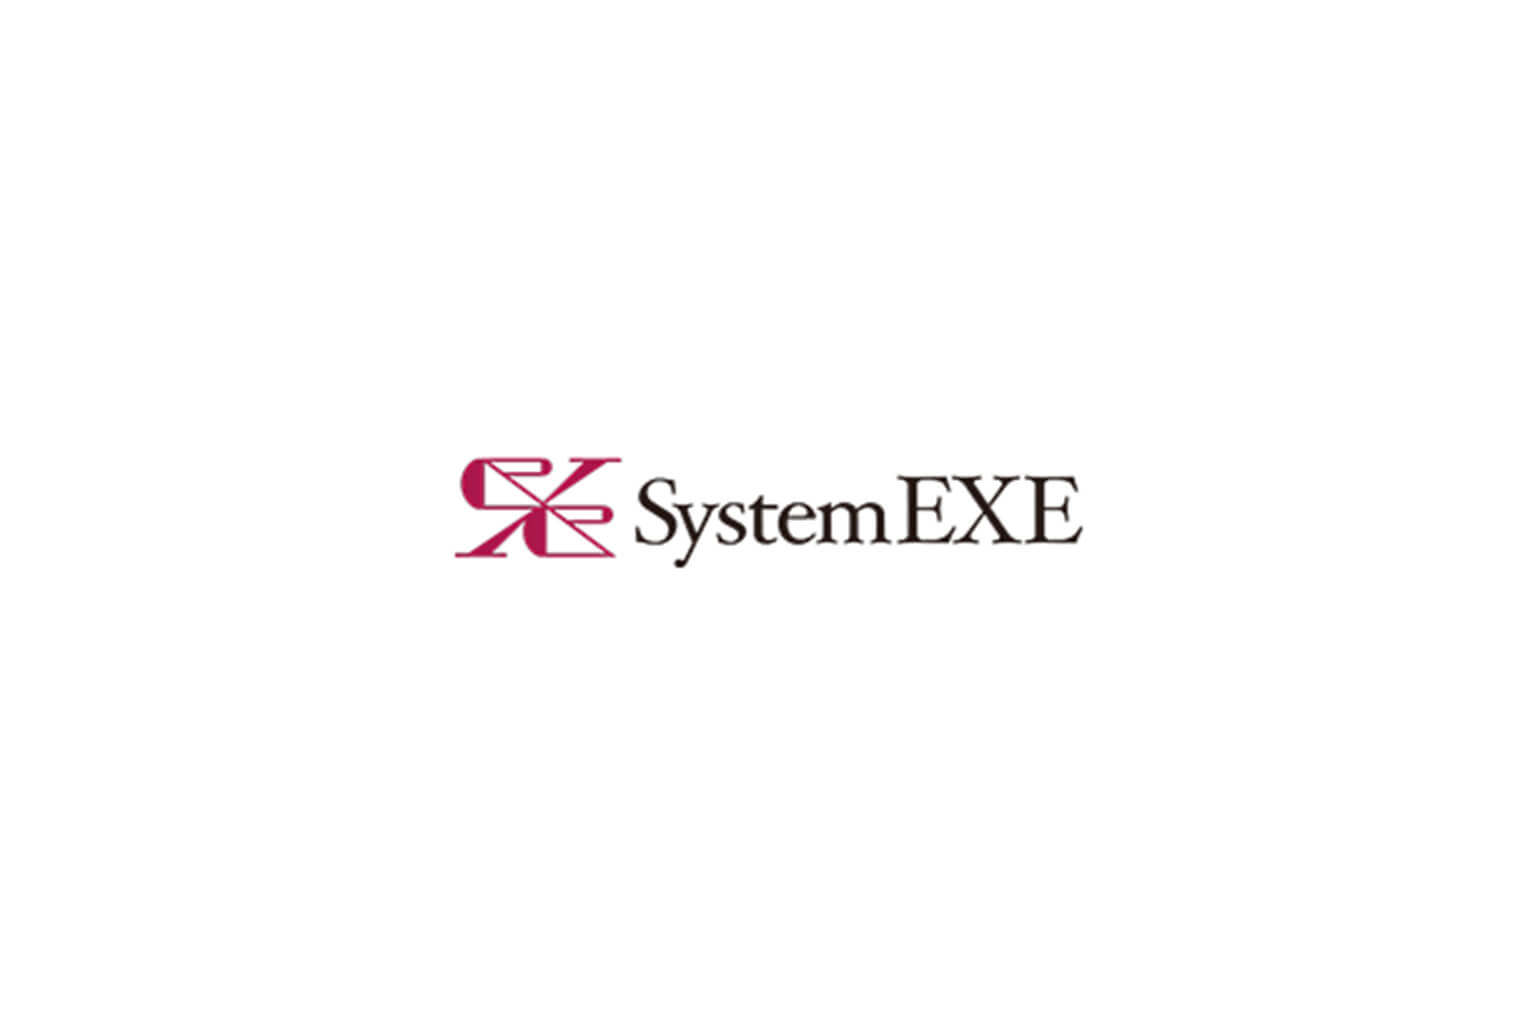 SystemEXE